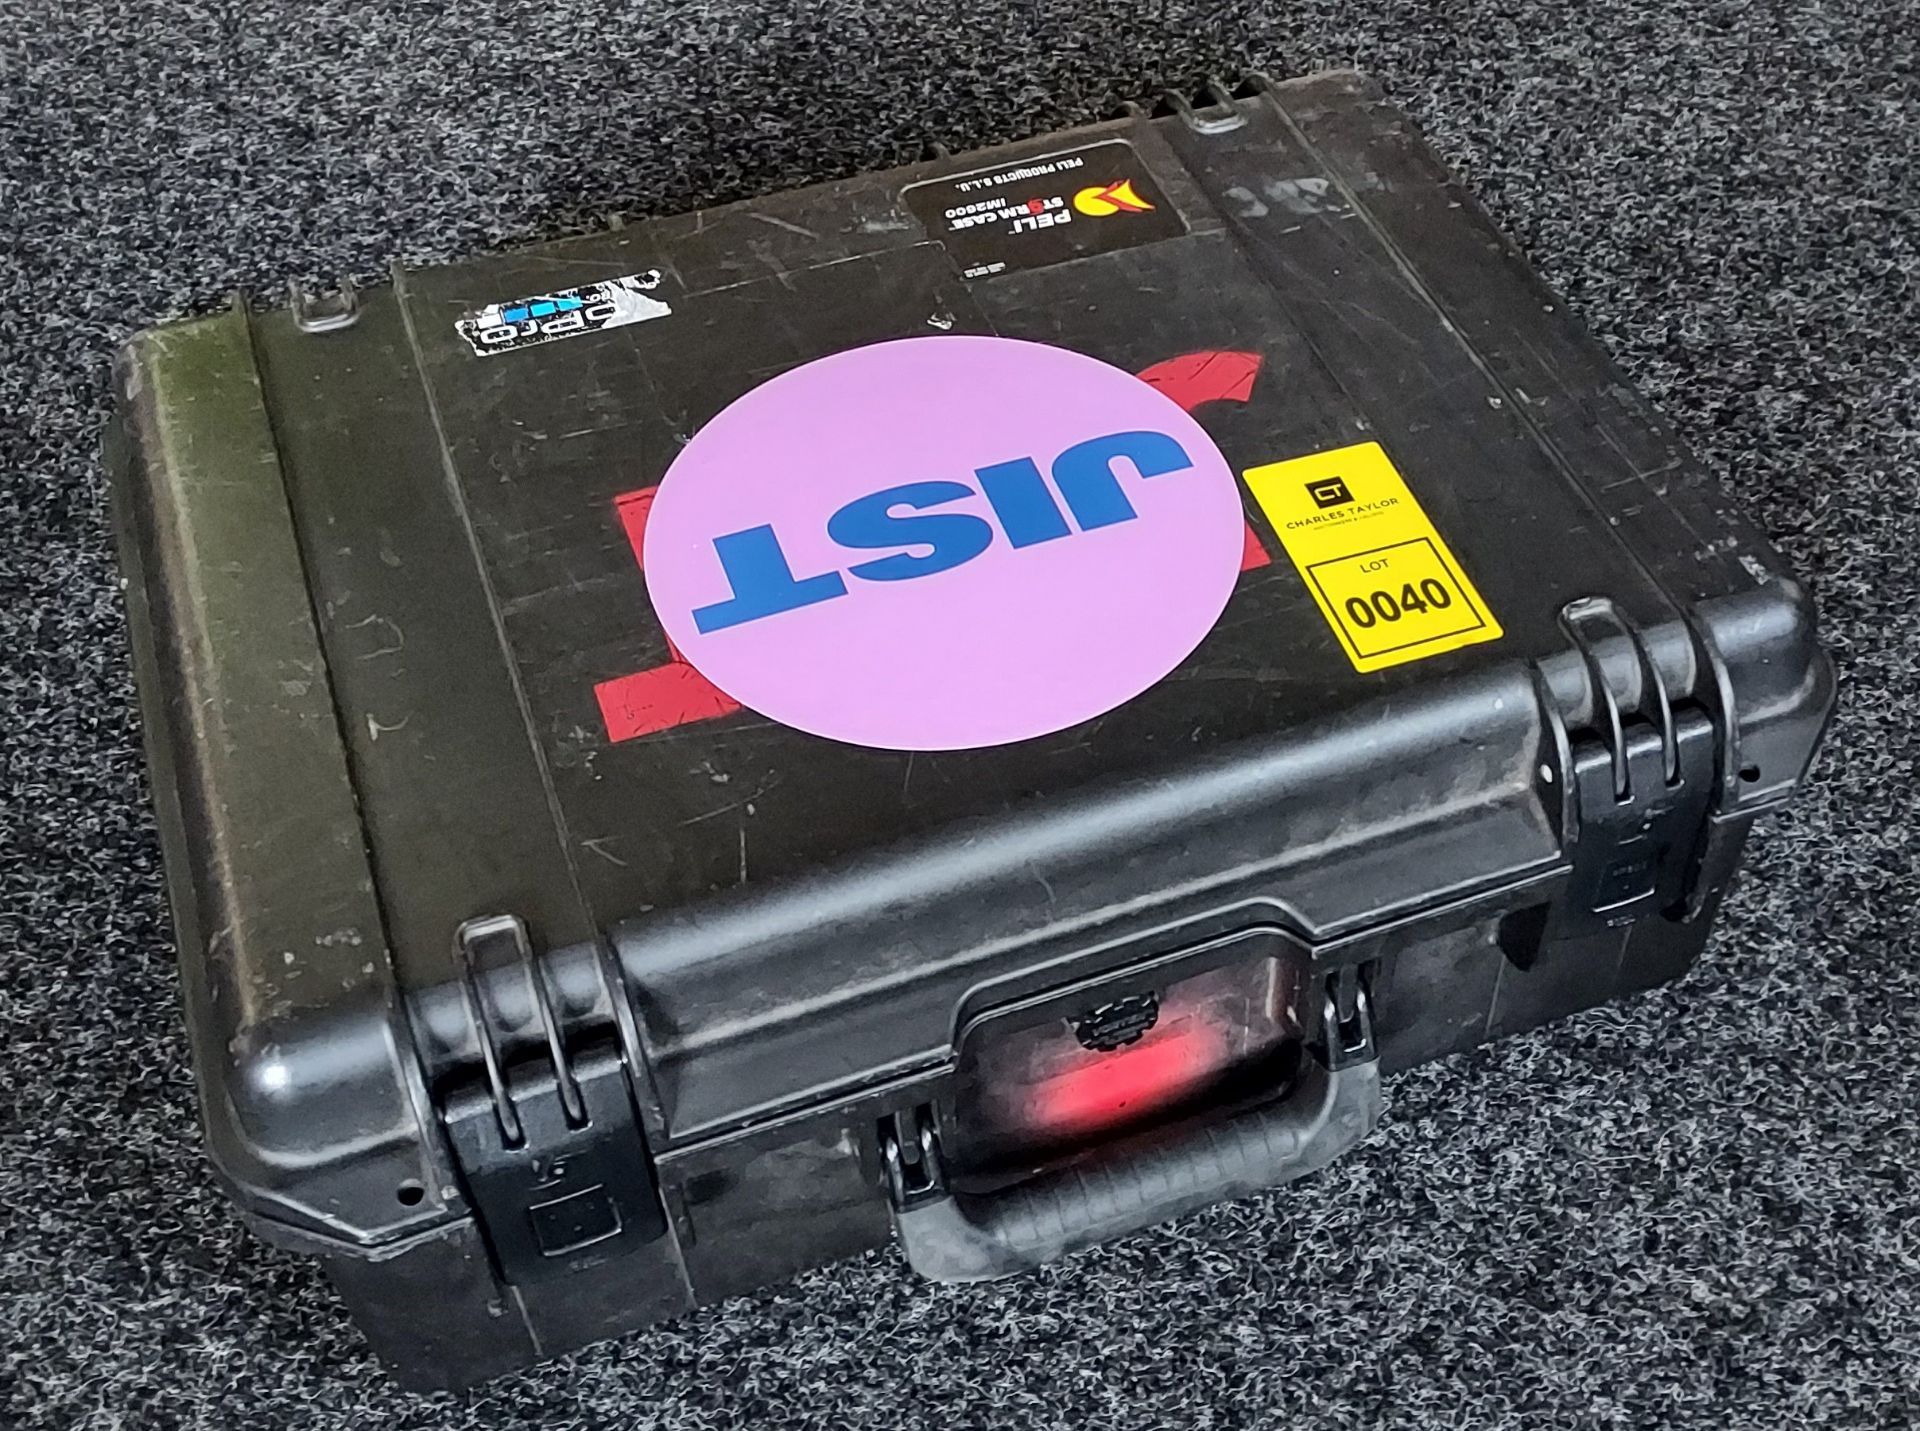 PELI STORM CASE IM2600 WITH FOAM PROTECTION - Image 3 of 3